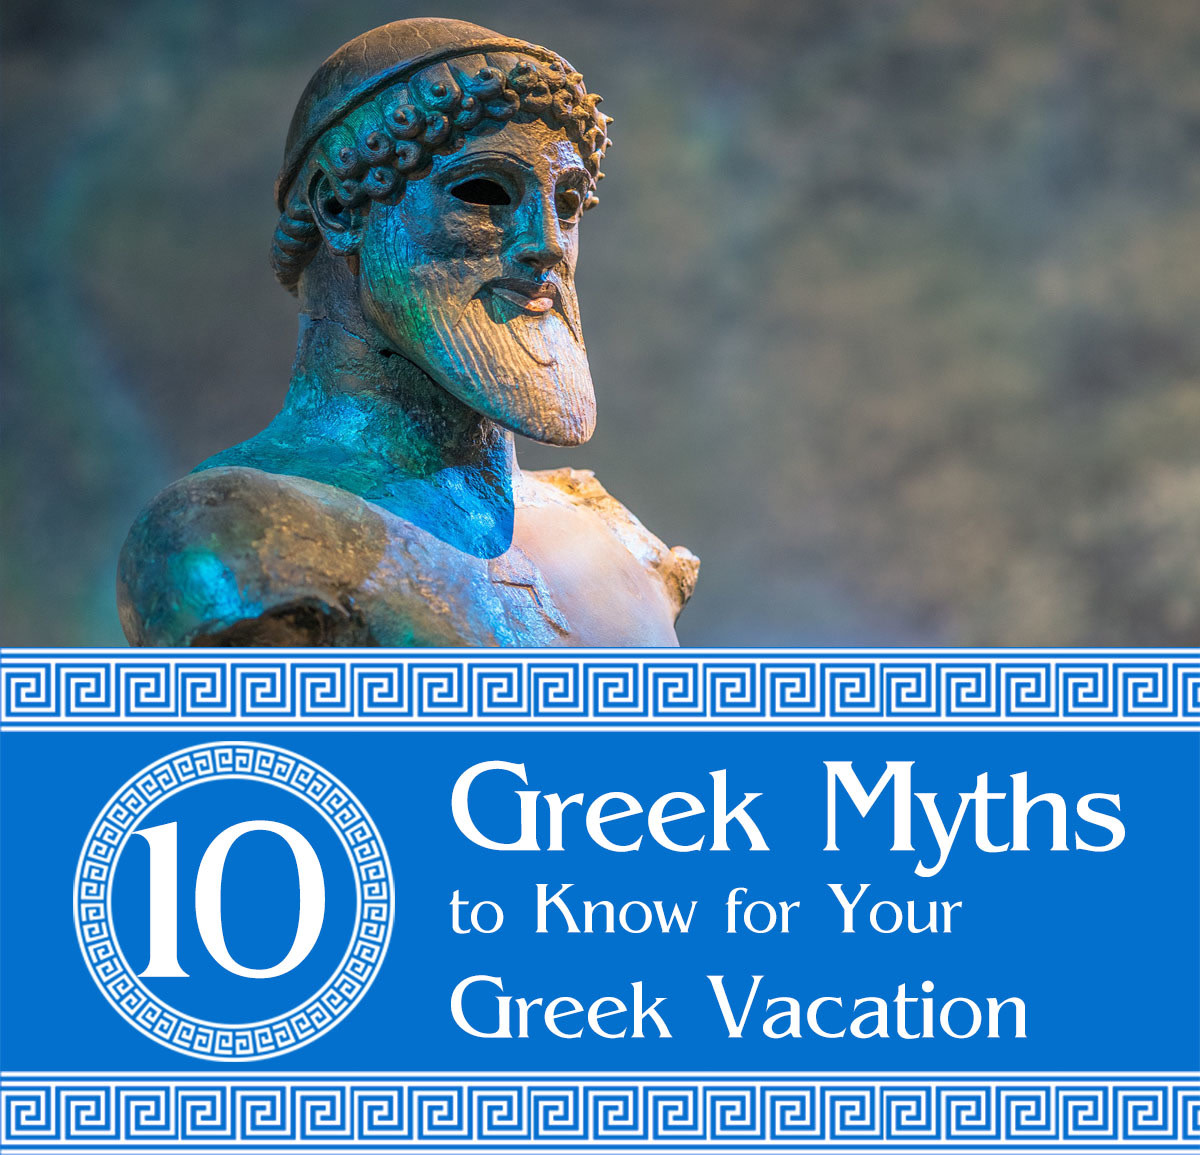 Top 10 Greek myths to know for a wonderful vacation in Greece.